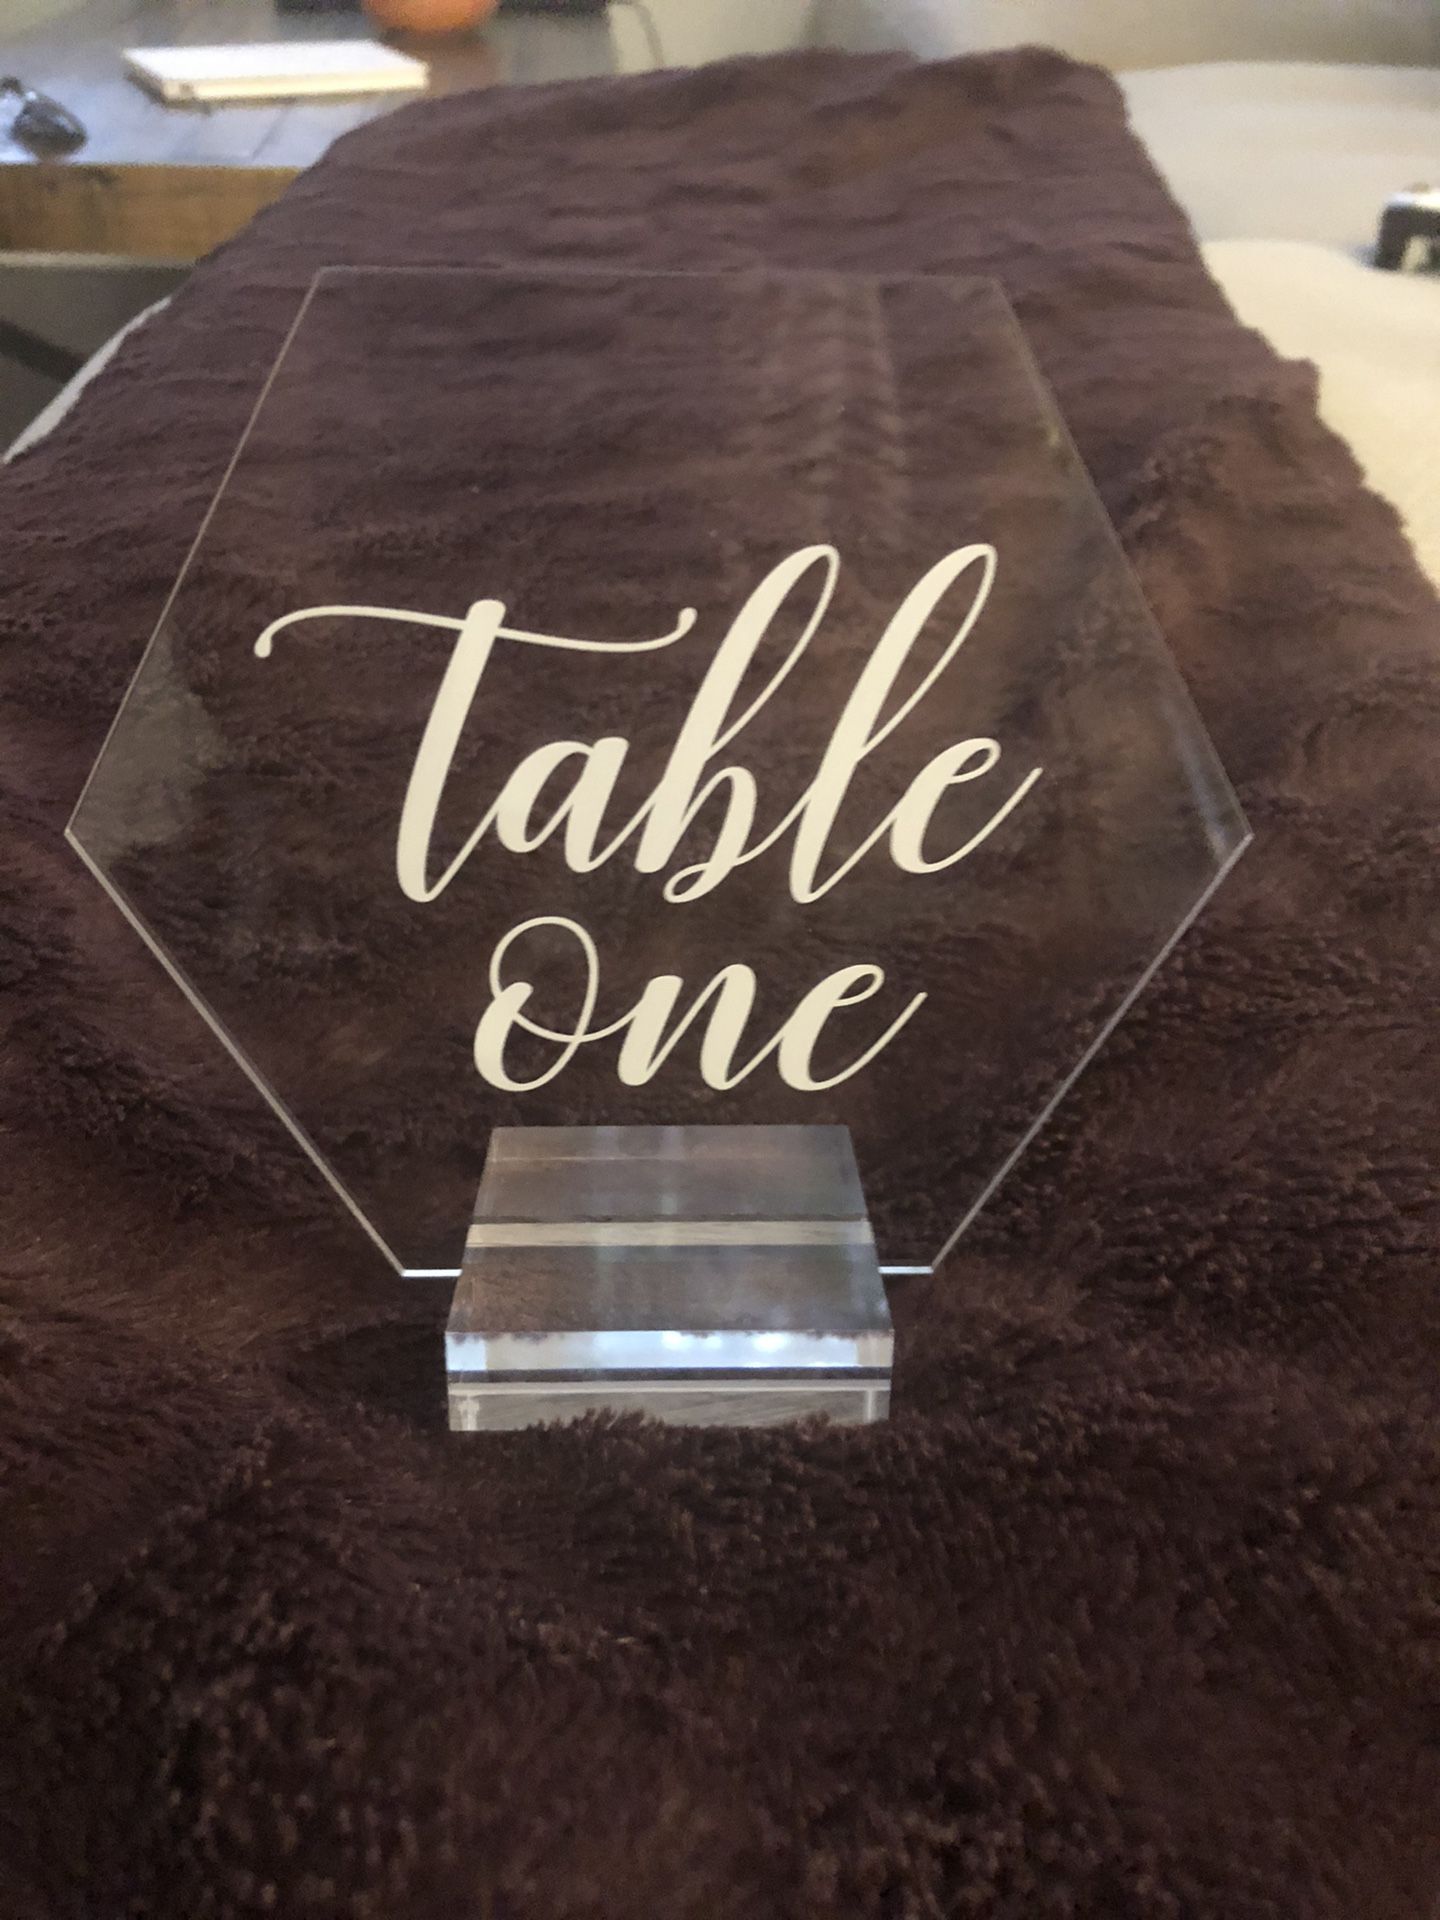 Acrylic table numbers # 1-10 with stand